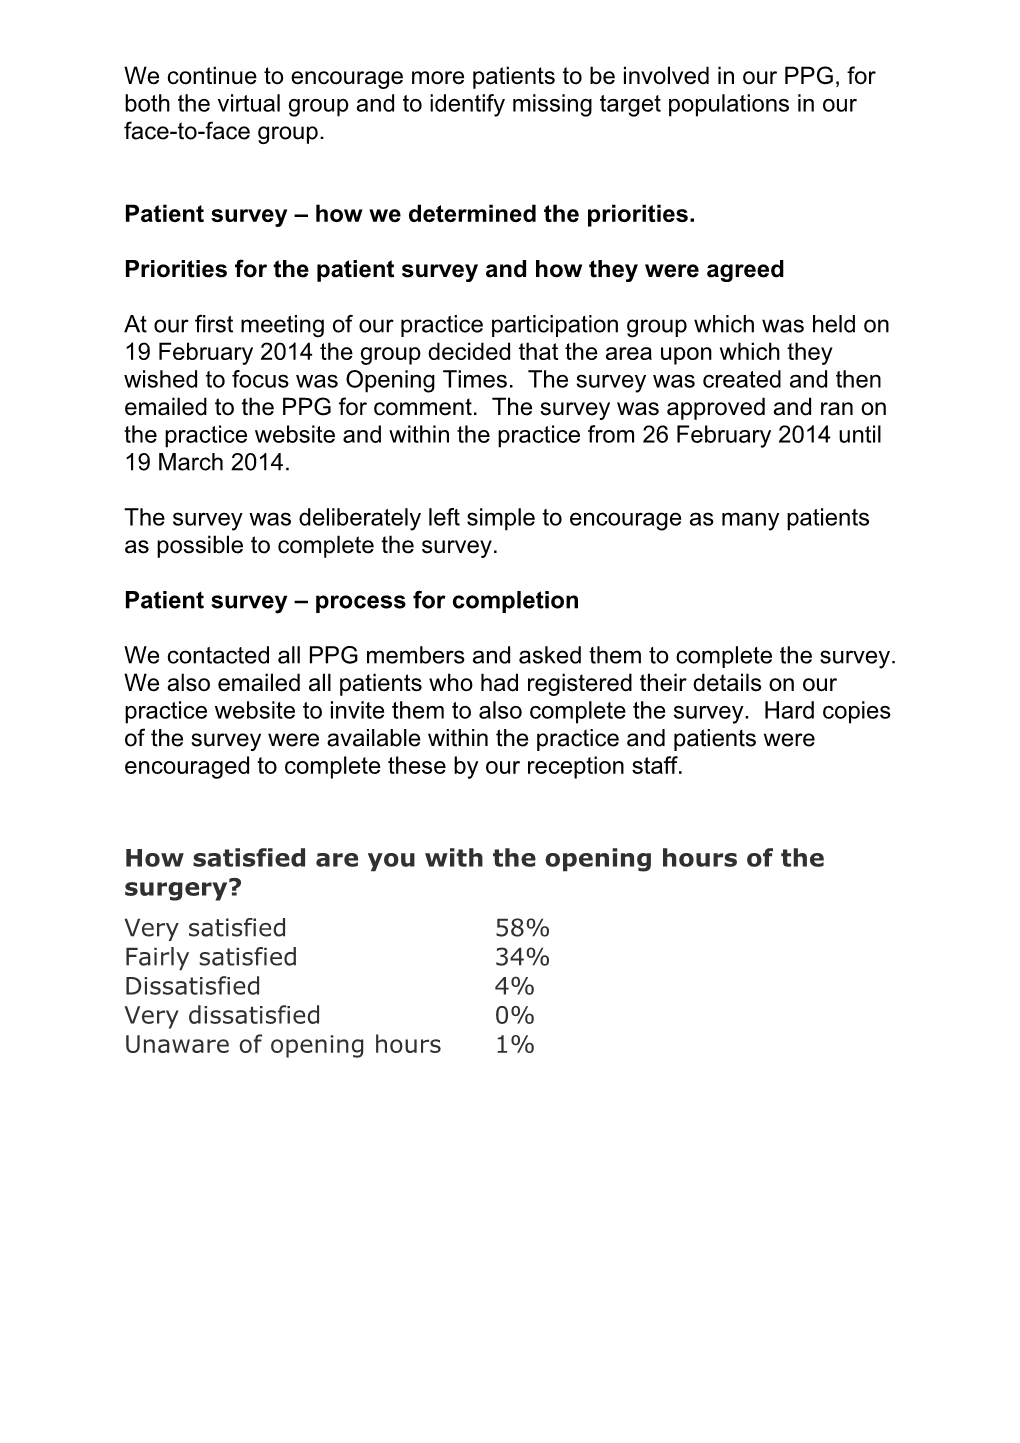 Profile of the Members of Our (Face to Face) Patient Participation Group